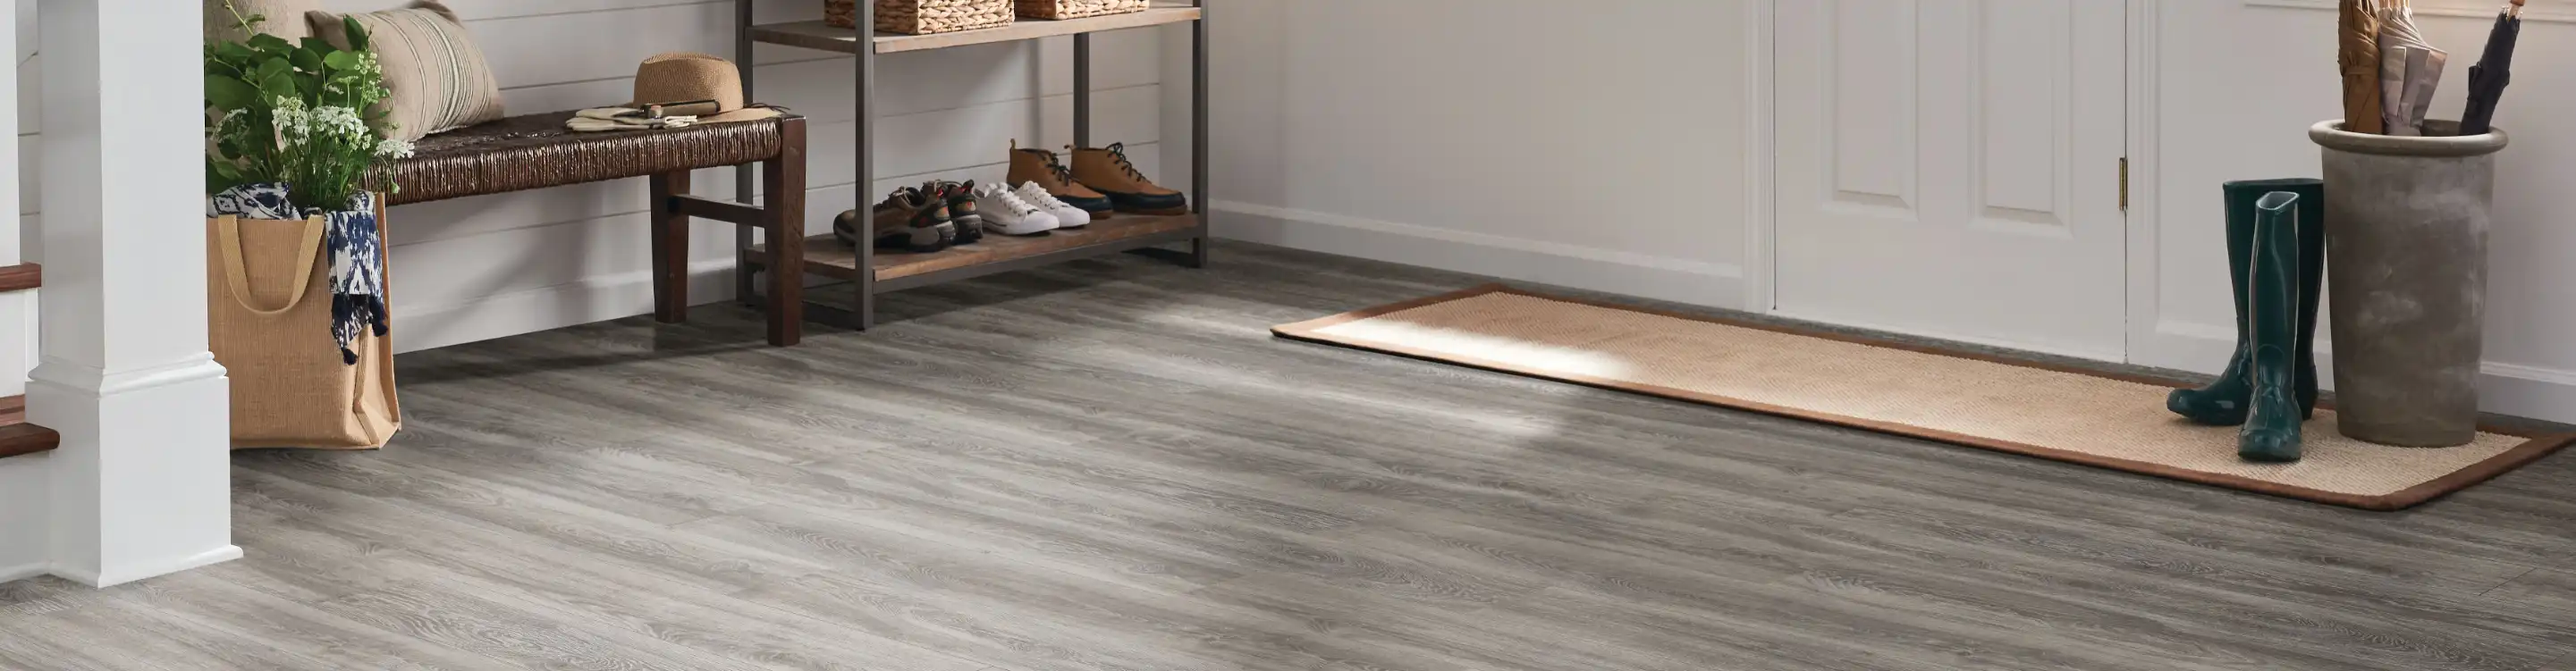 wood look laminate flooring in living room with grey couches